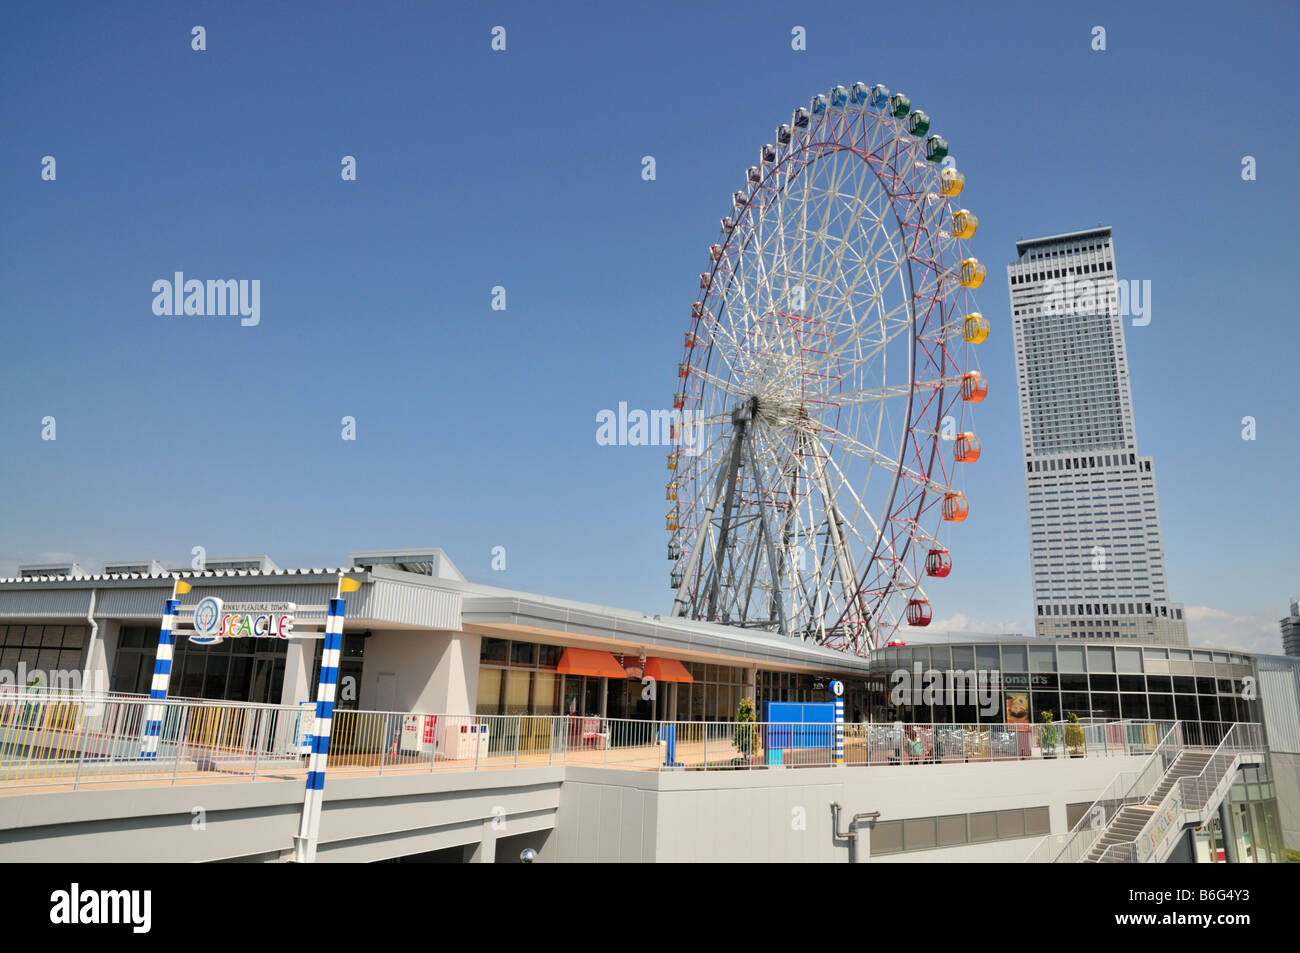 Seacle Rinku Pleasure Town Outlet Mall with ferris wheel with coloured capsules and Ana Tower Gate Hotel, Osaka, Japan Stock Photo